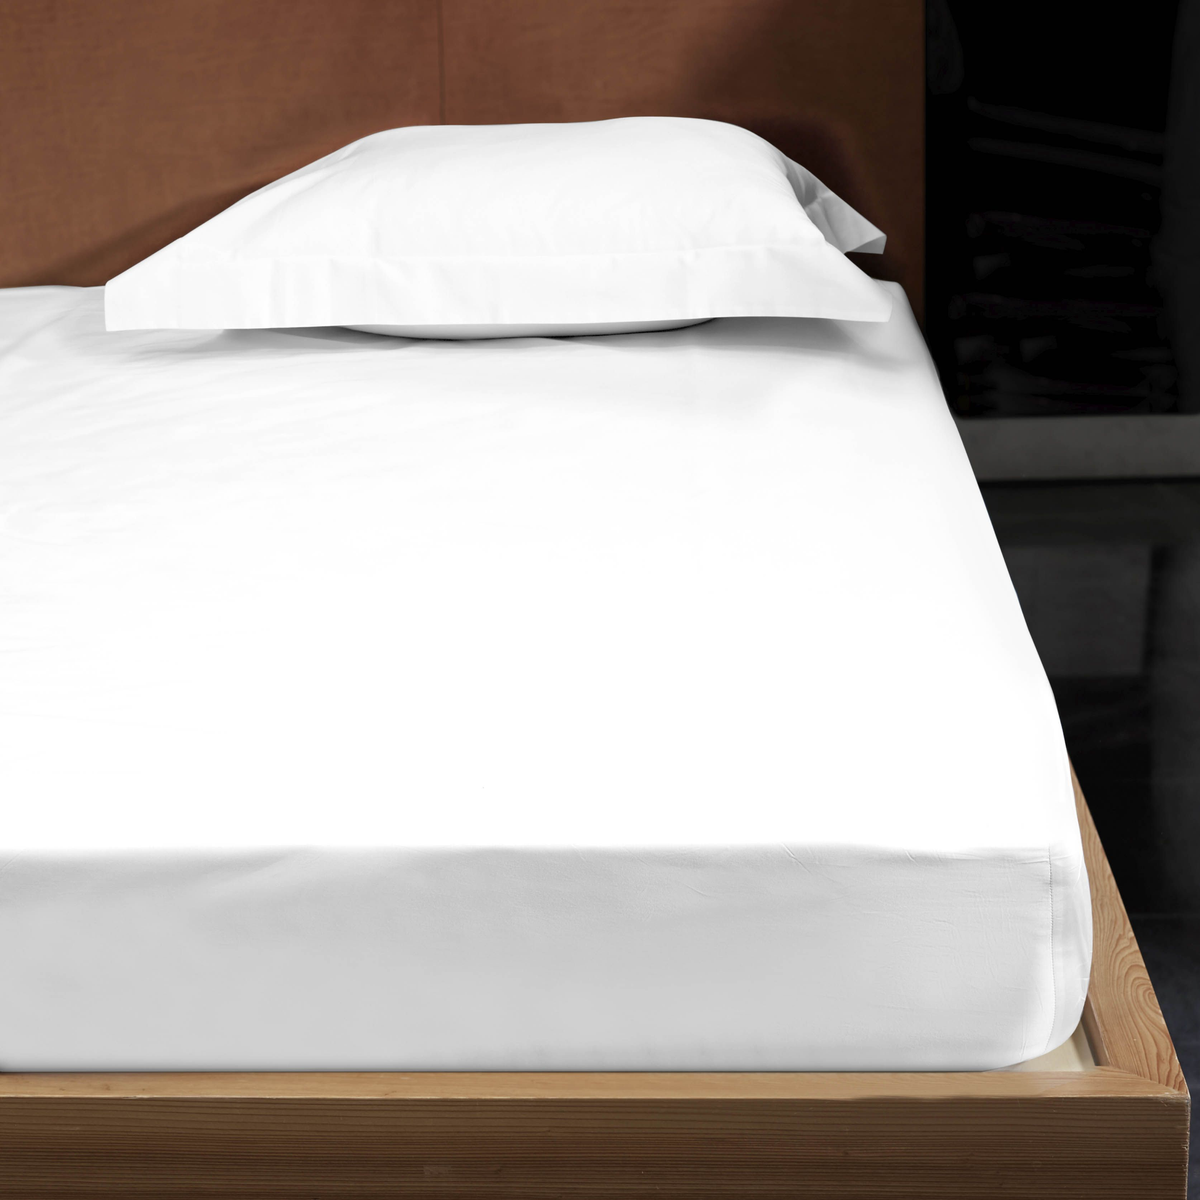 Mattress in Signoria Nuvola Fitted Sheet in White Color